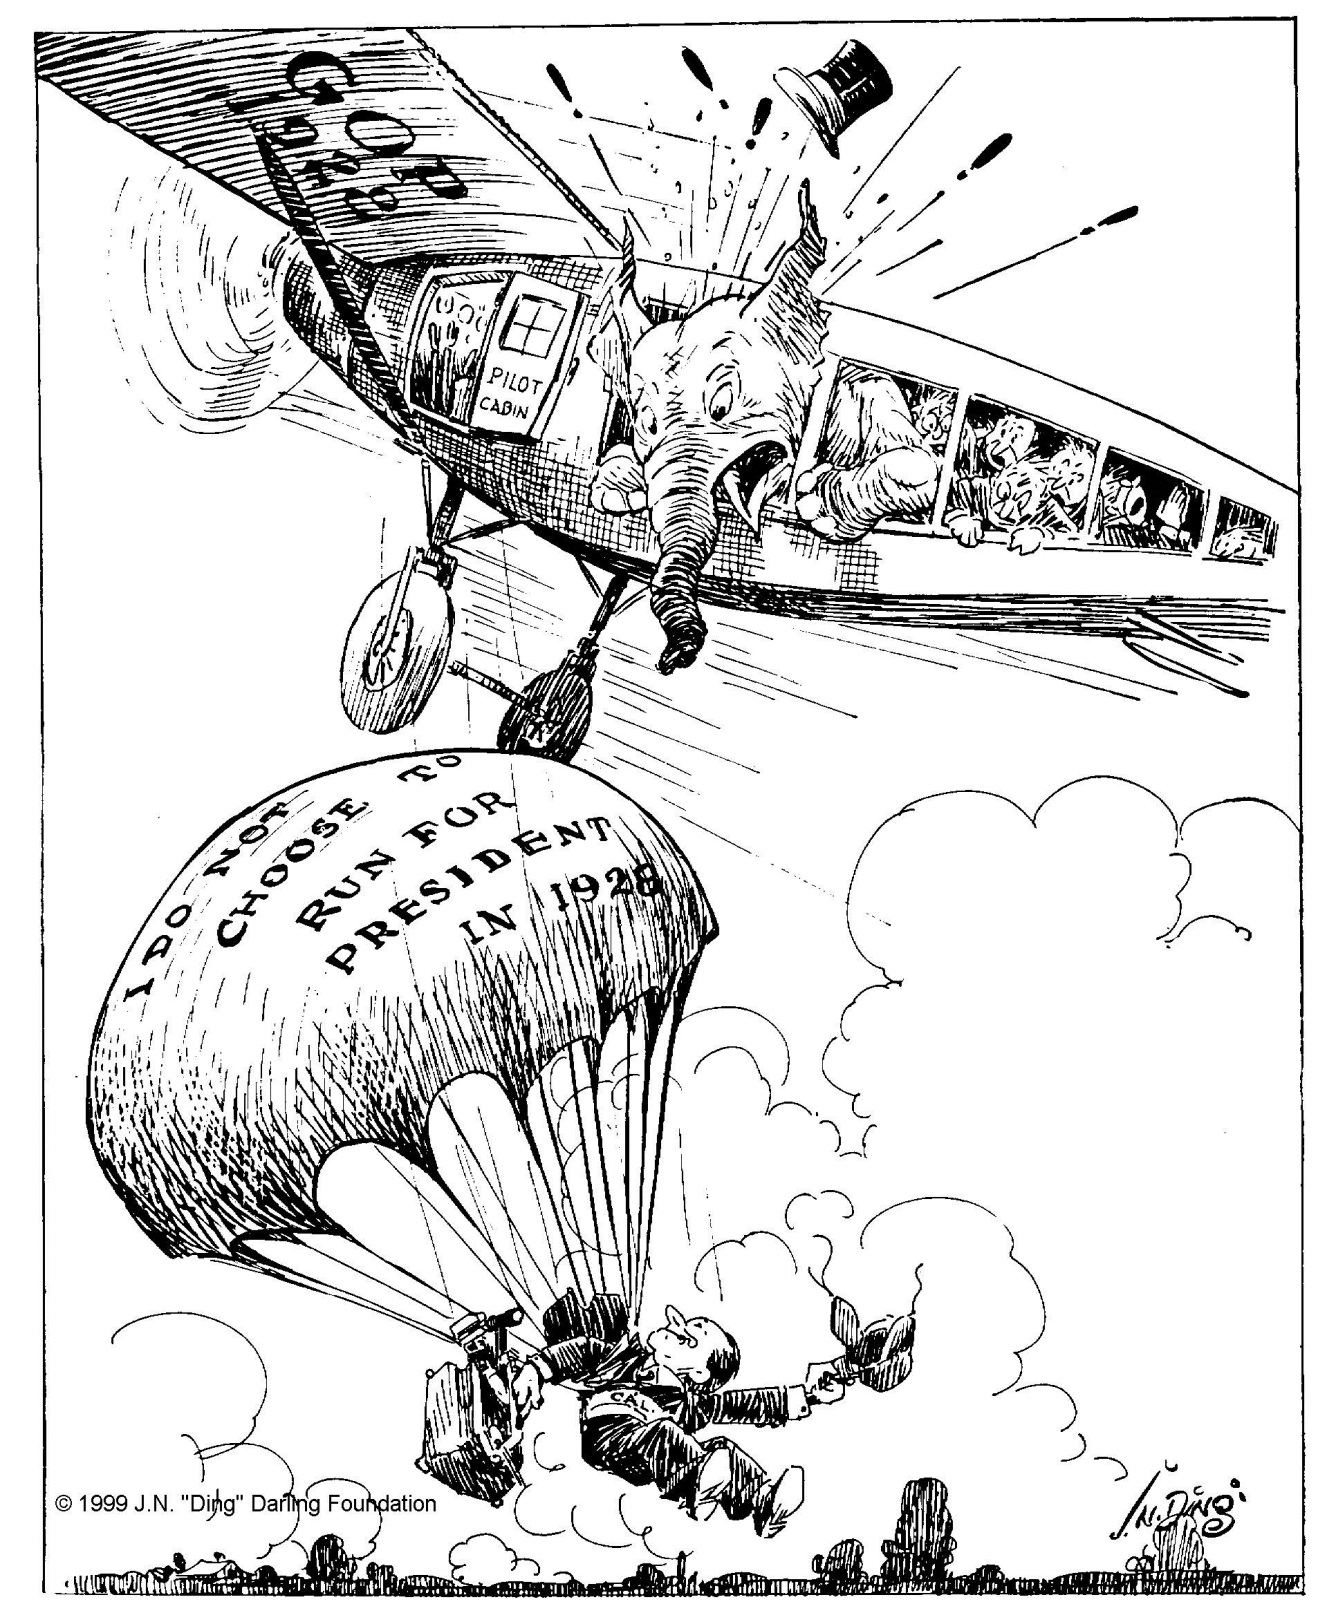 Cartoon by "Ding" Darling, appearing on August 3, 1927 in The Des Moines Register. 